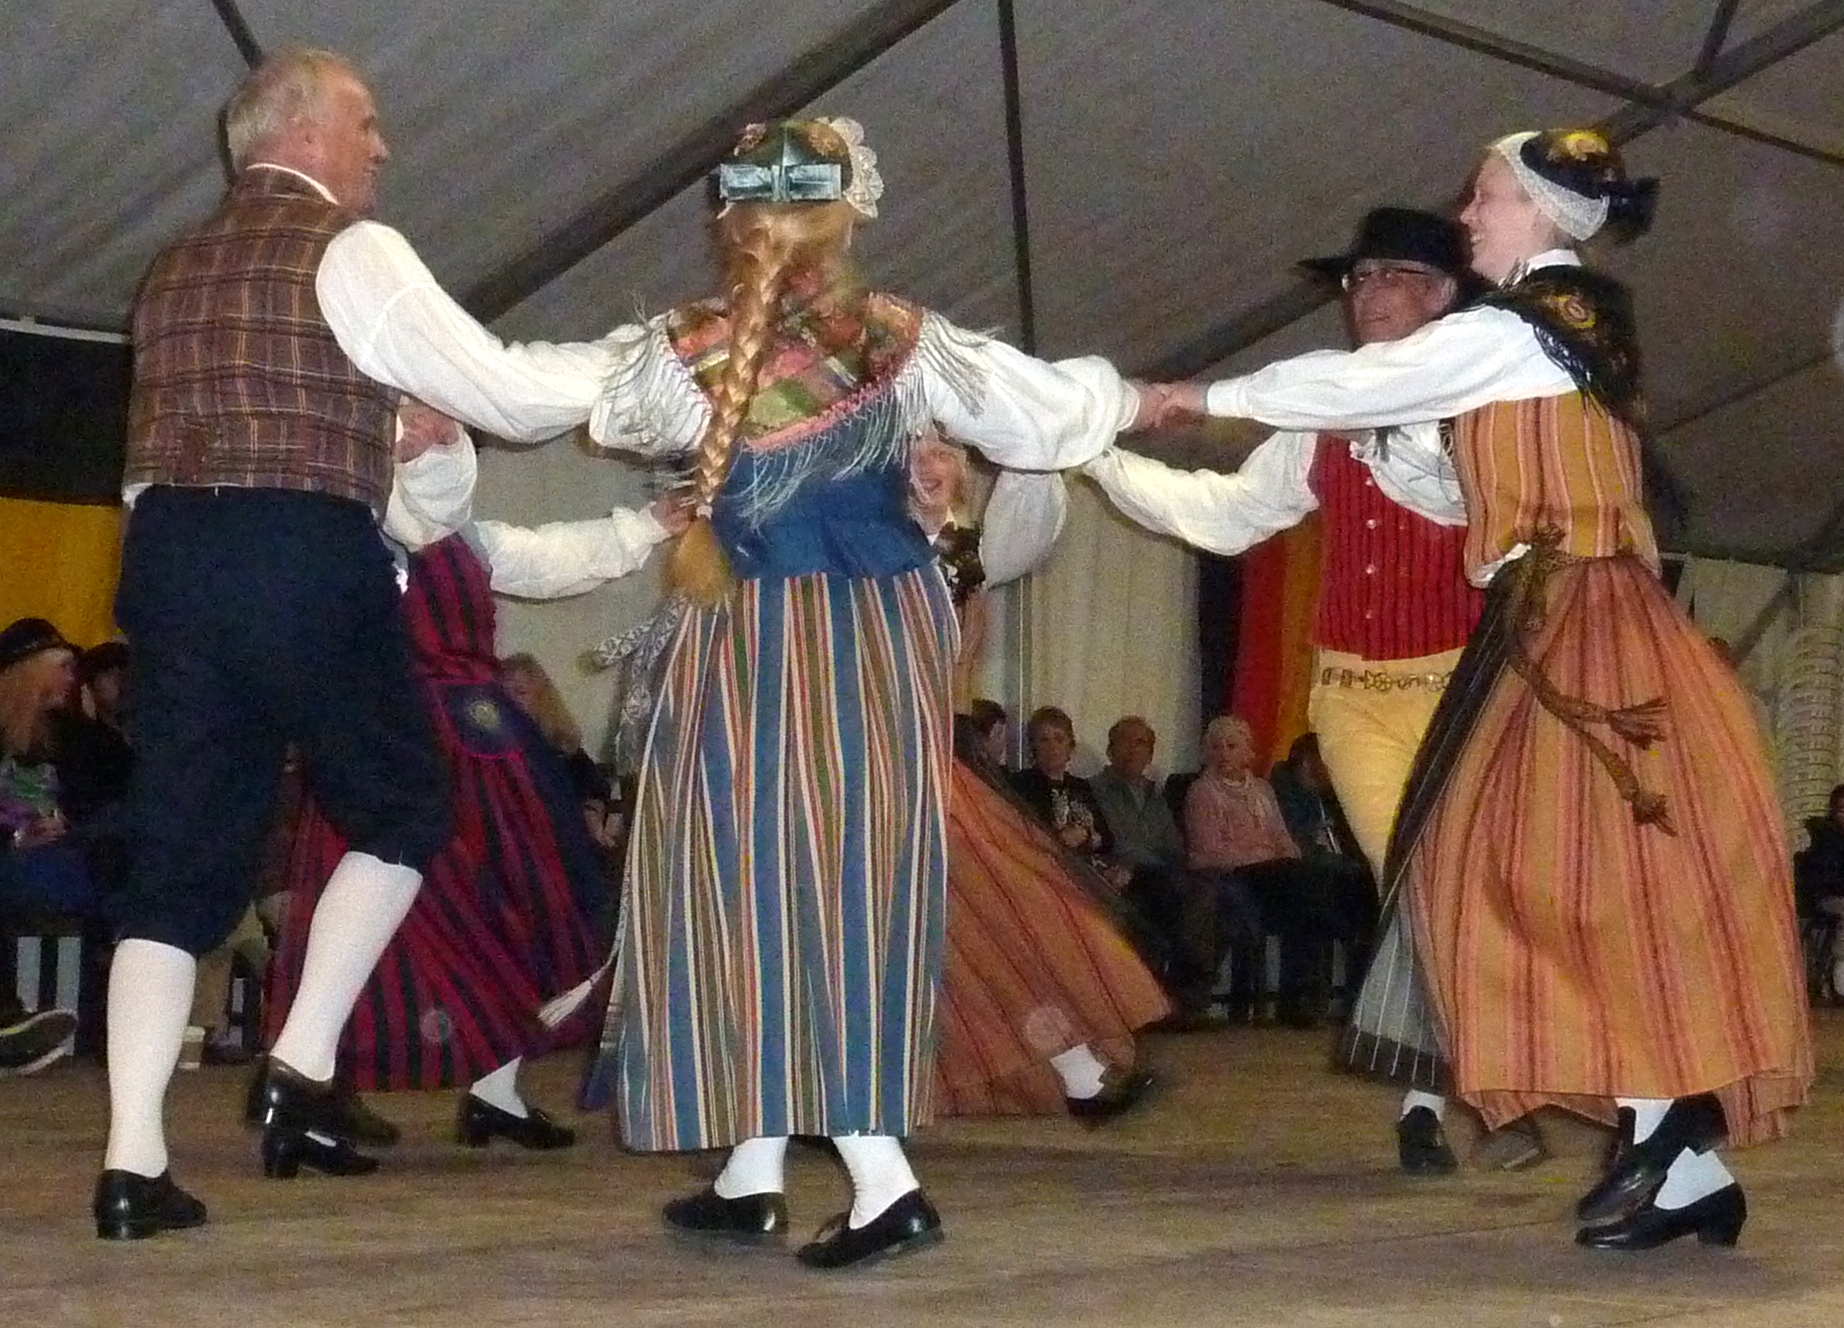 a group of people dancing around a tent